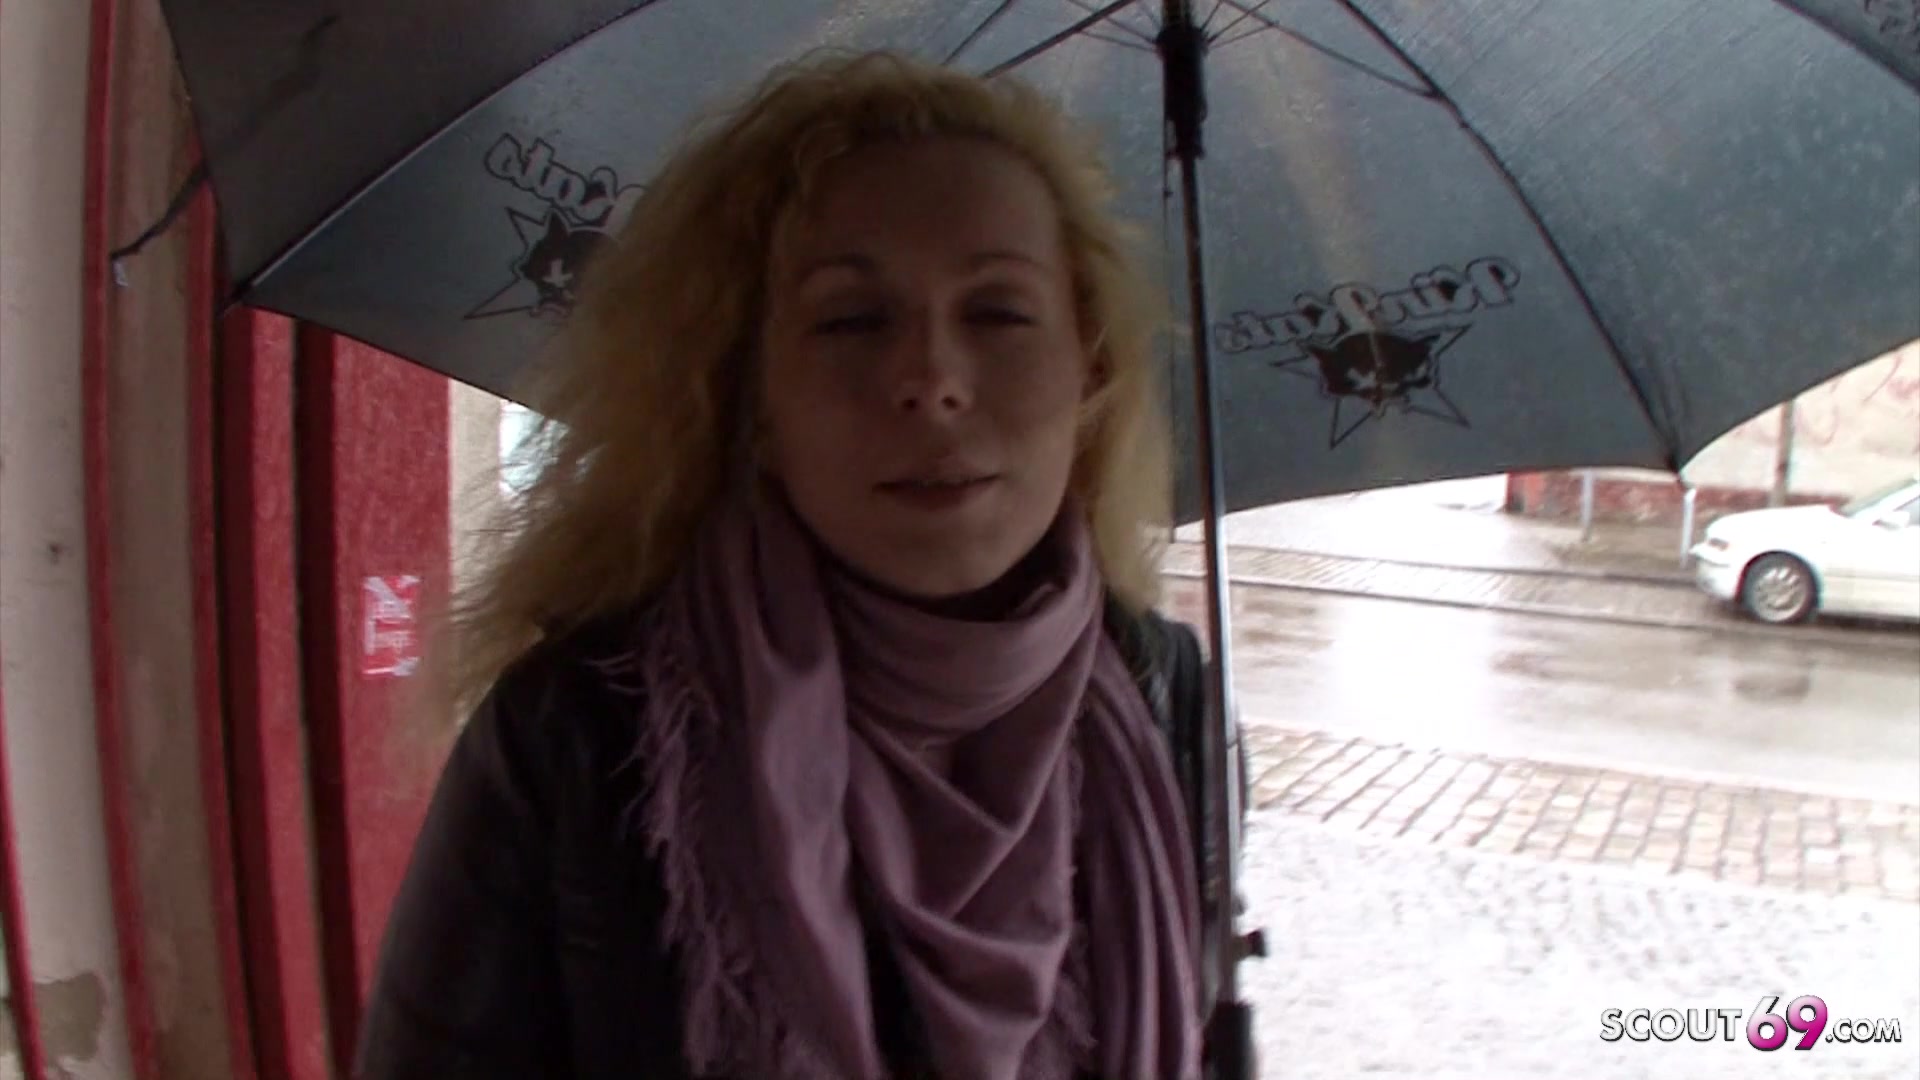 Mature Seduce to Fuck for Cash at Street Casting German